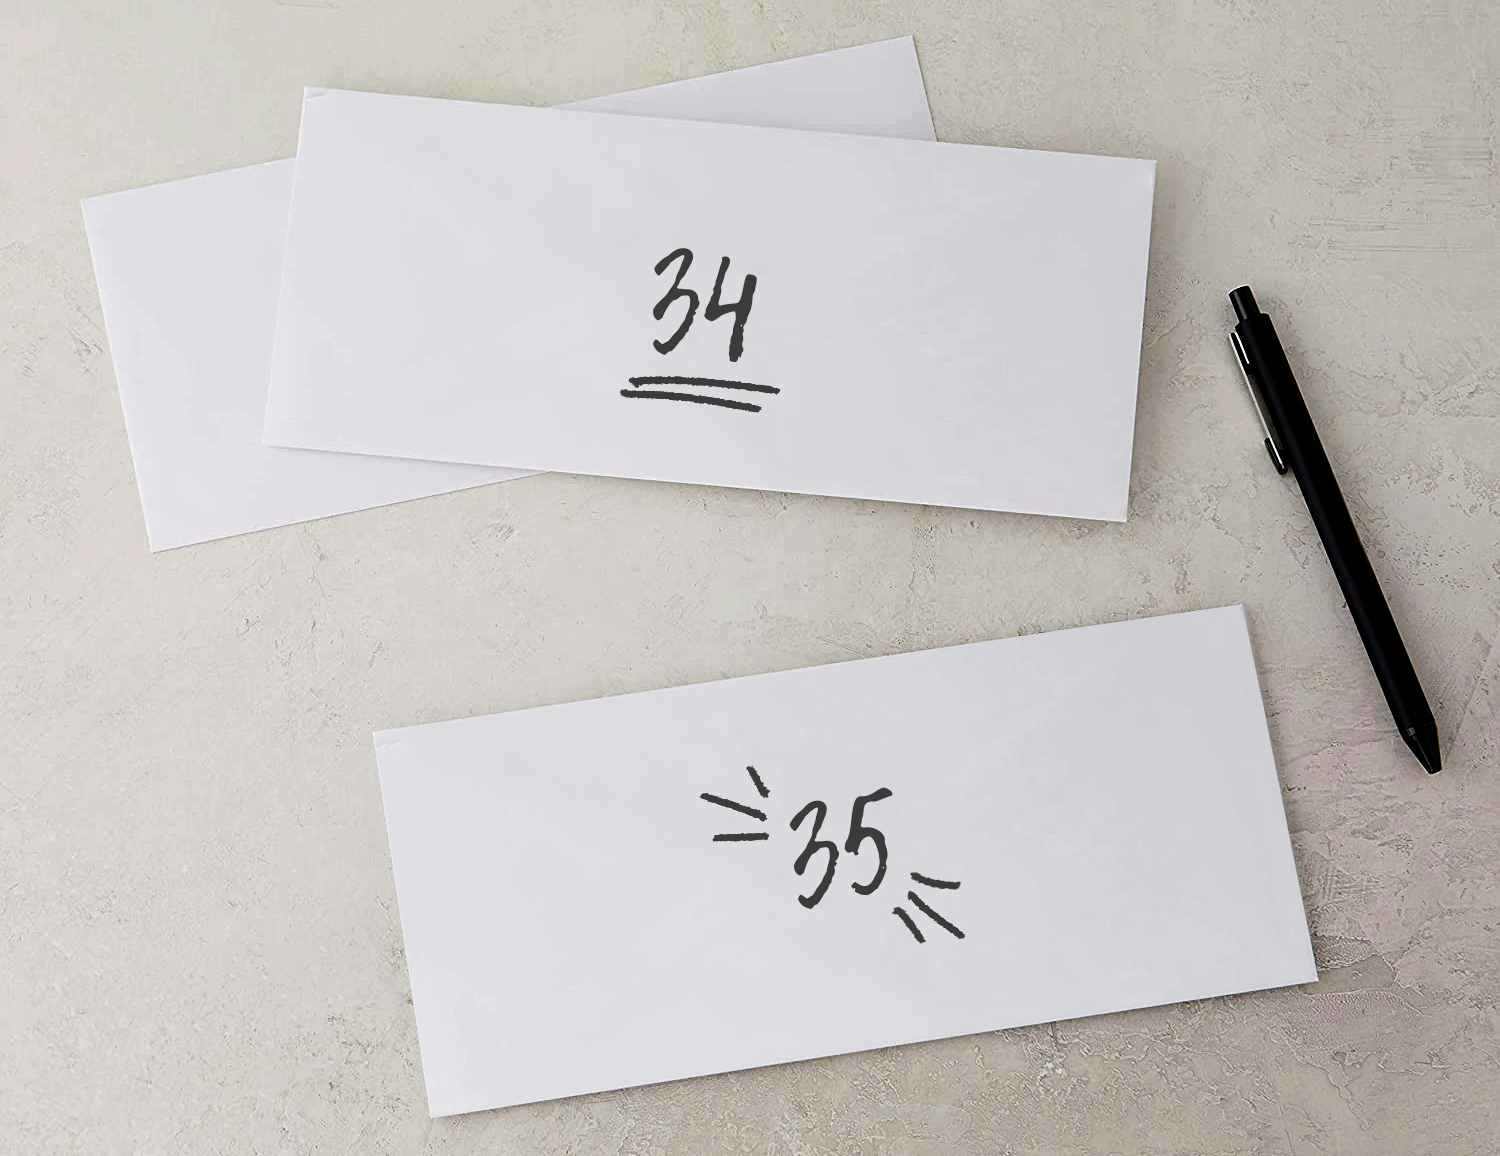 business envelopes with numbers written on them